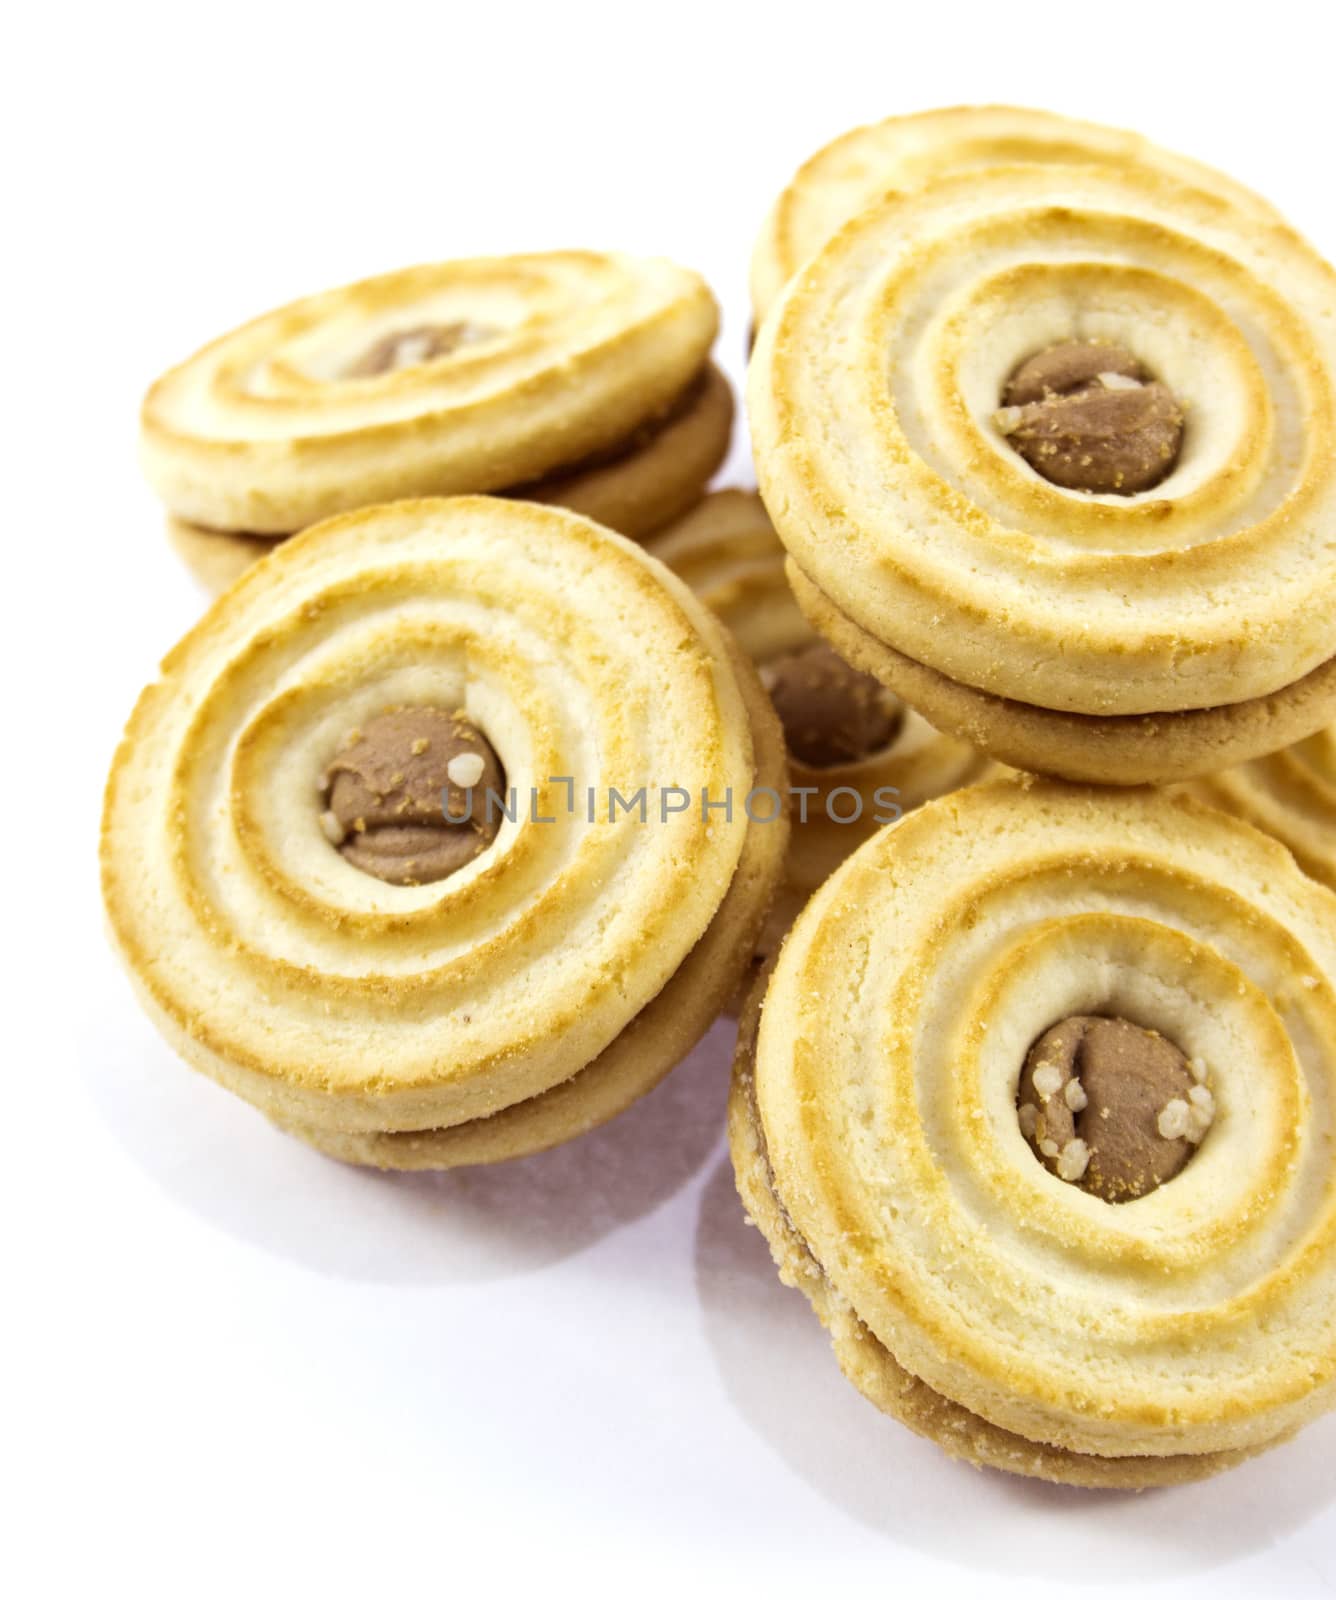 Sandwich biscuits, filled with chocolate, isolated on white background